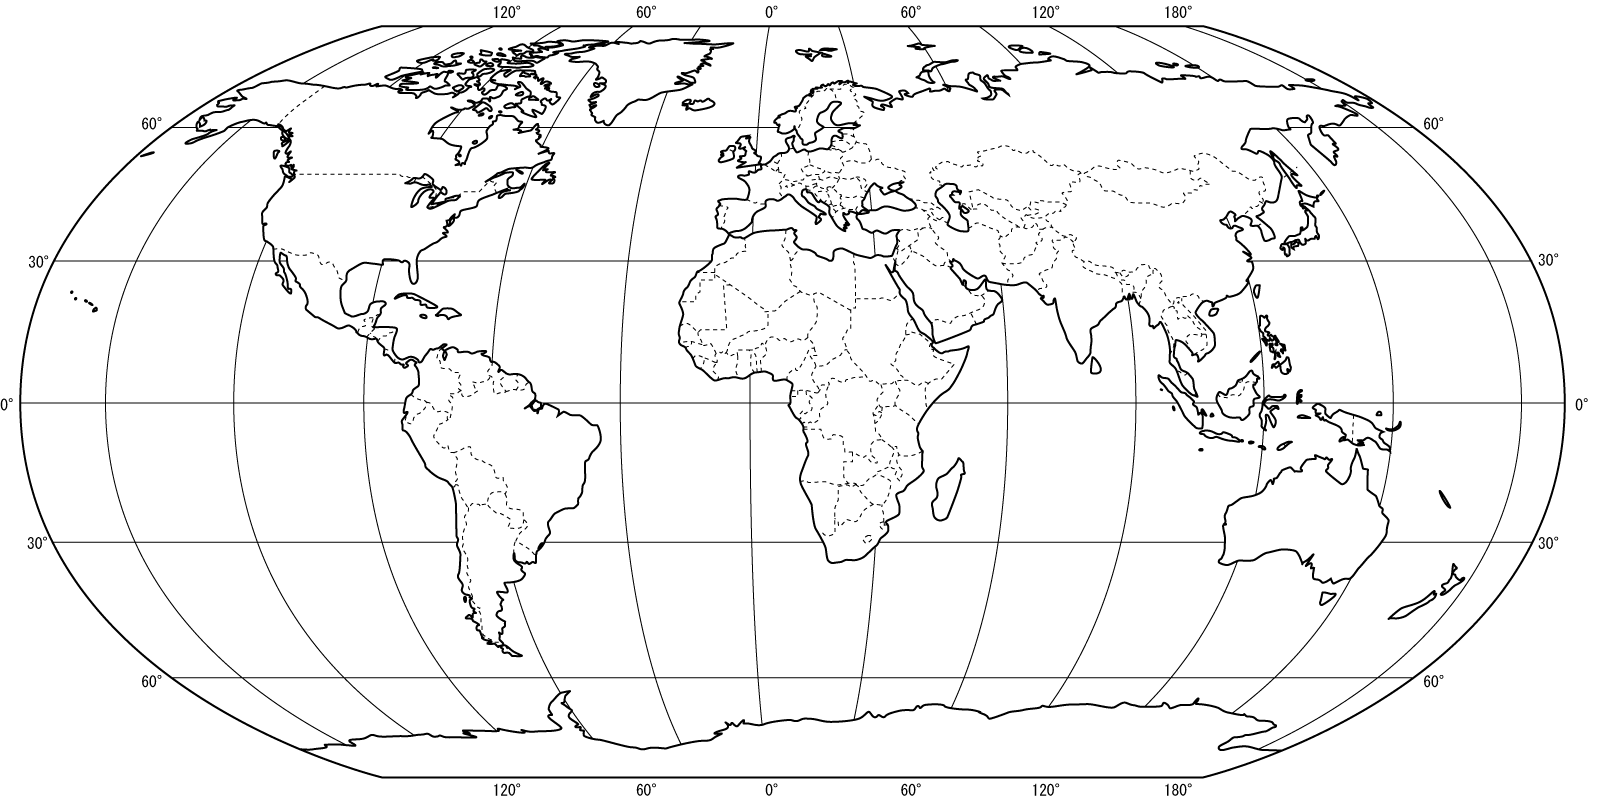 Free Printable World Map With Countries Labeled For Kids